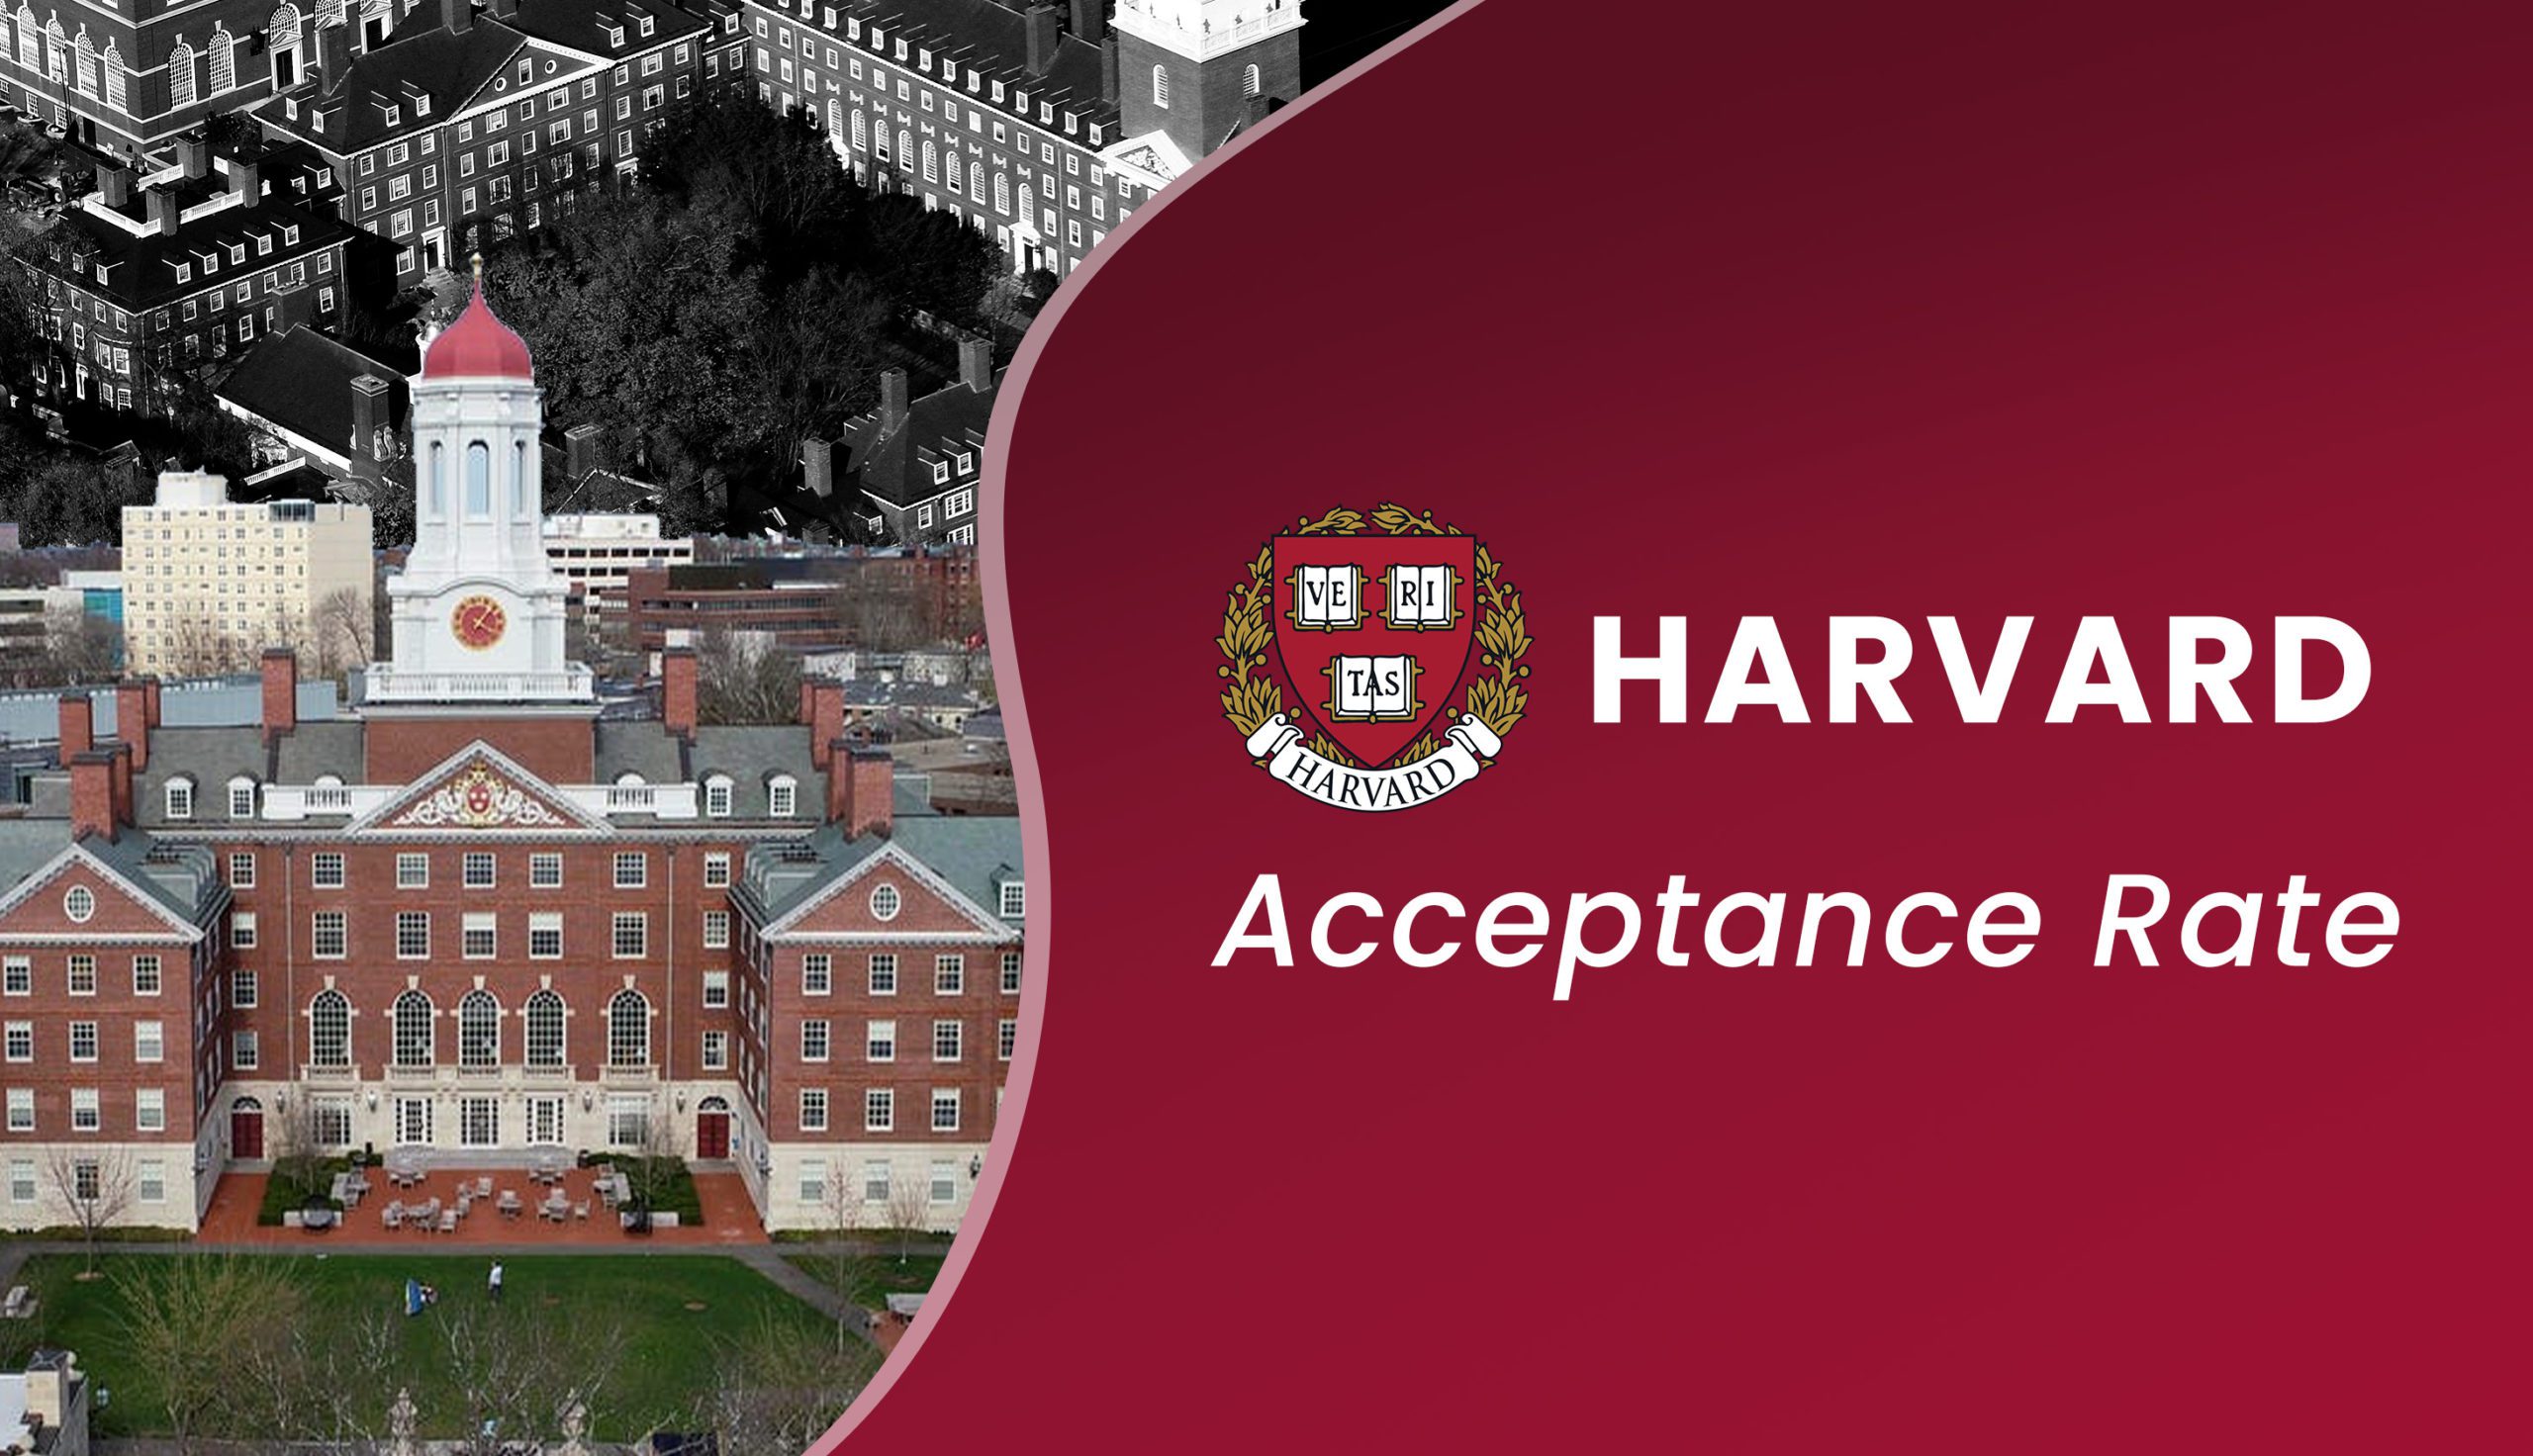 Harvard Acceptance Rate | Admission Requirements & Tuition 2023 | Geetra